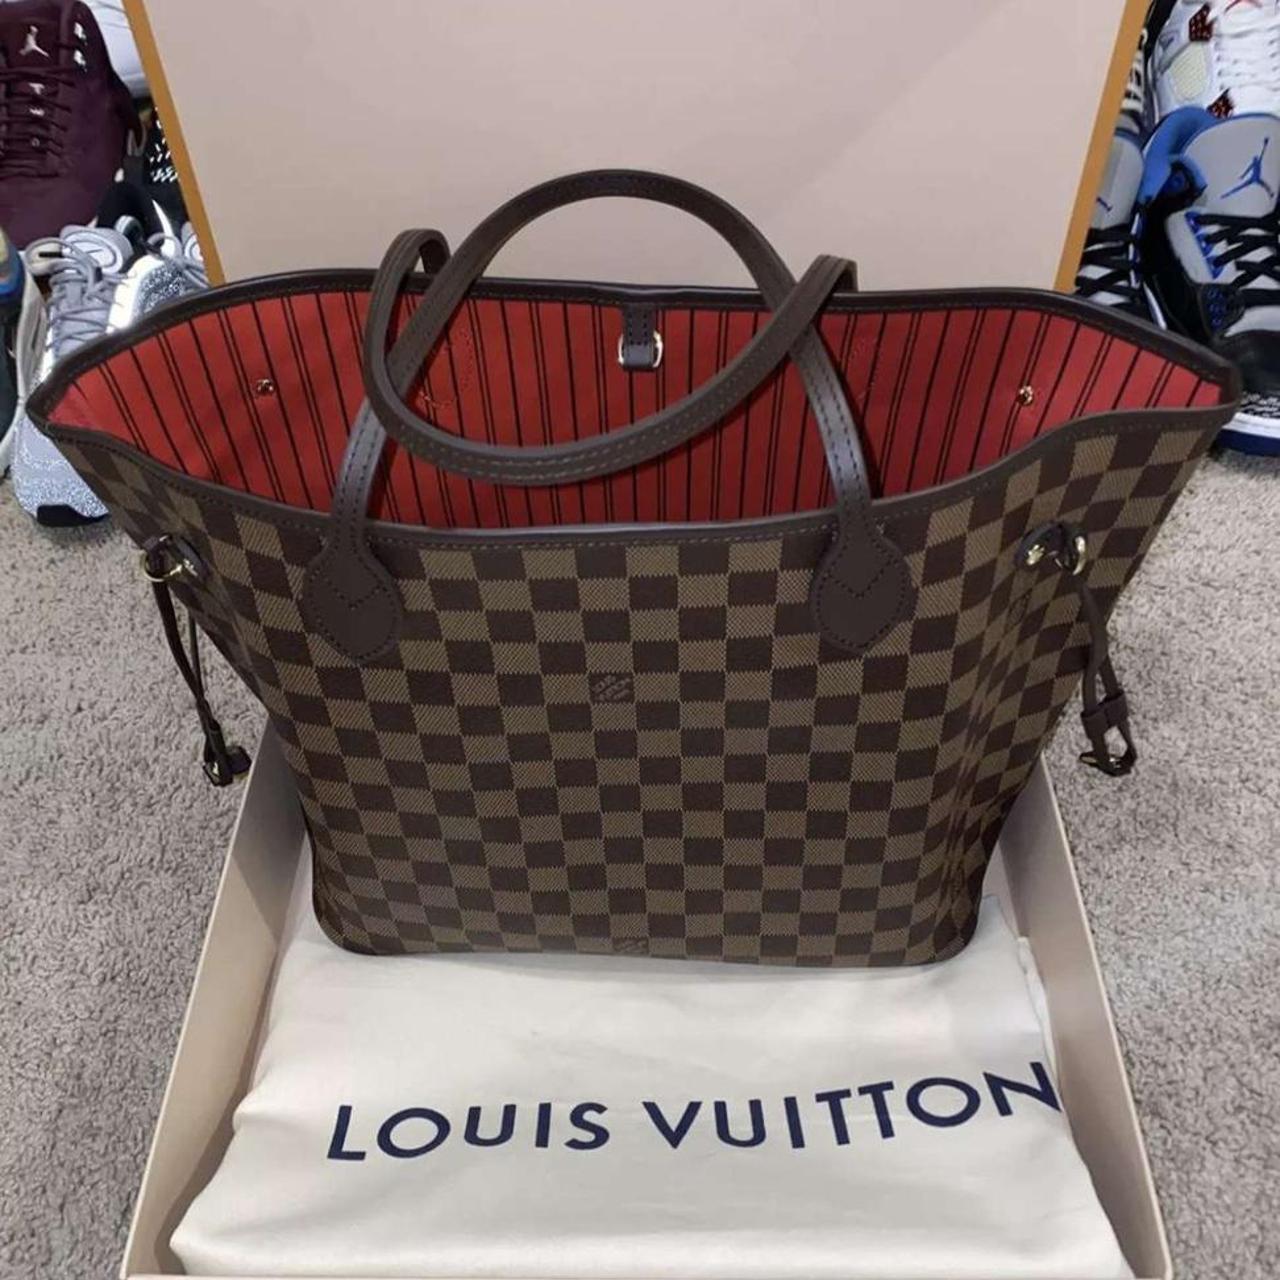 Authentic Louis Vuitton Bag, c. 2001: 811 ppm Lead. 90 is unsafe. Does your  baby play with your purse?